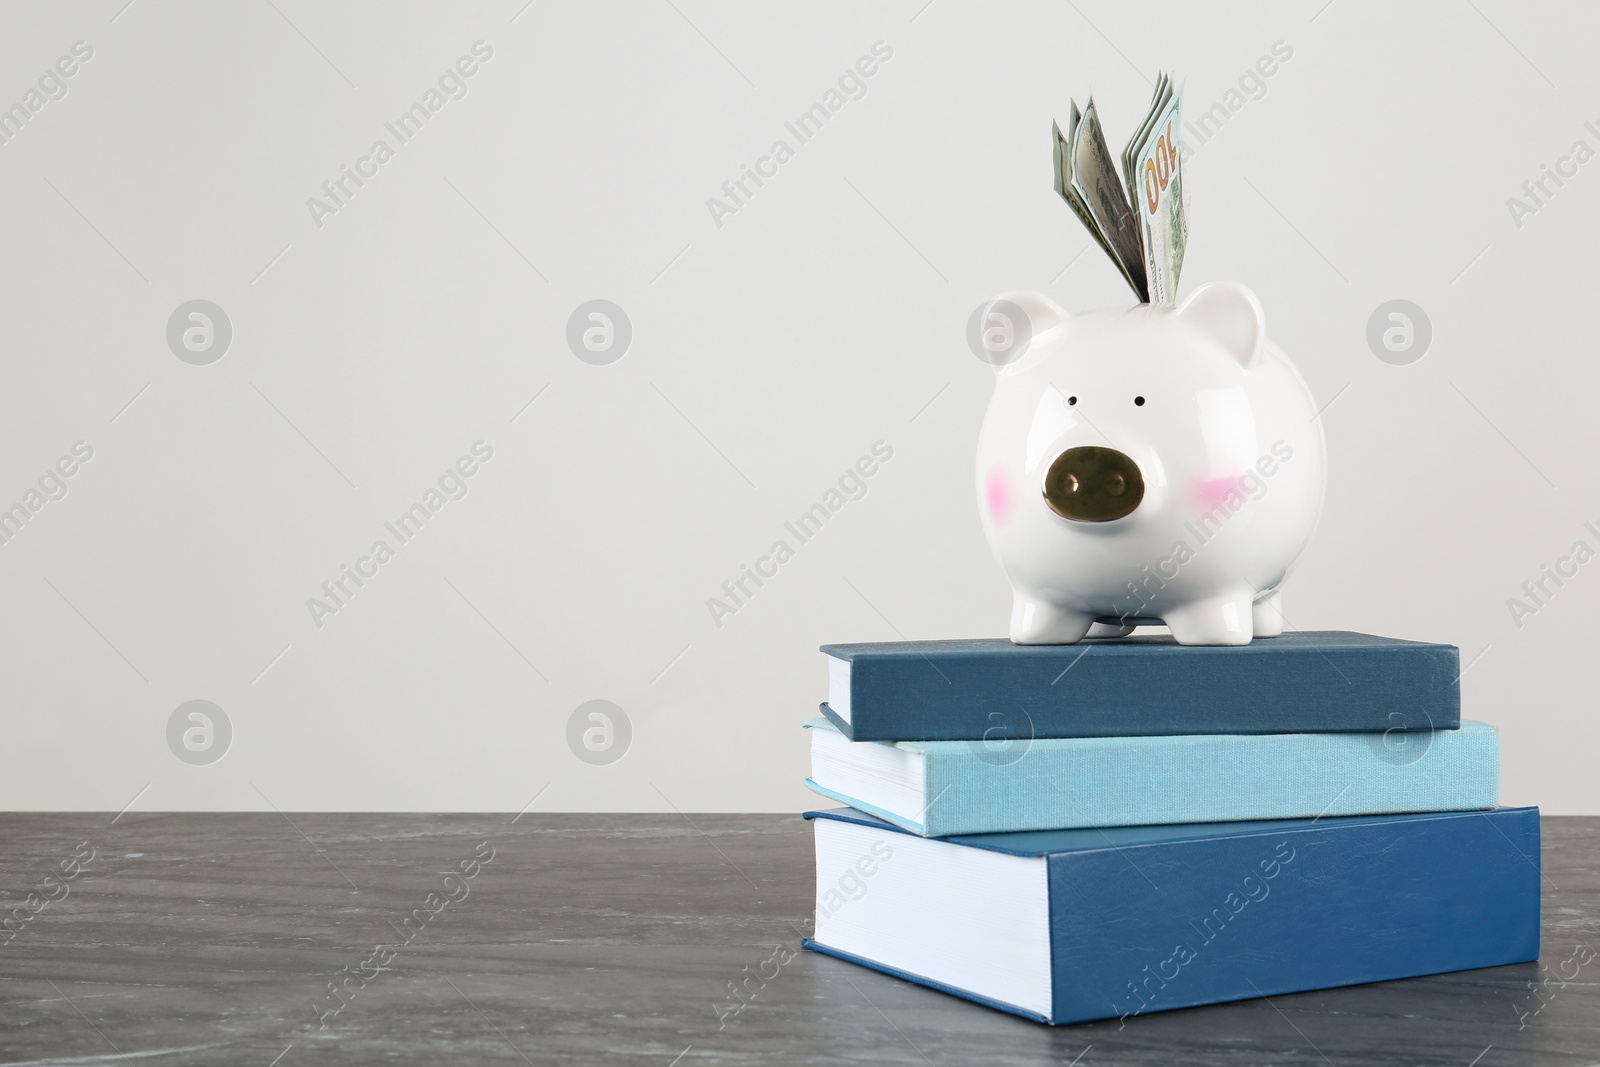 Photo of Piggy bank with dollars on books against white background. Space for text